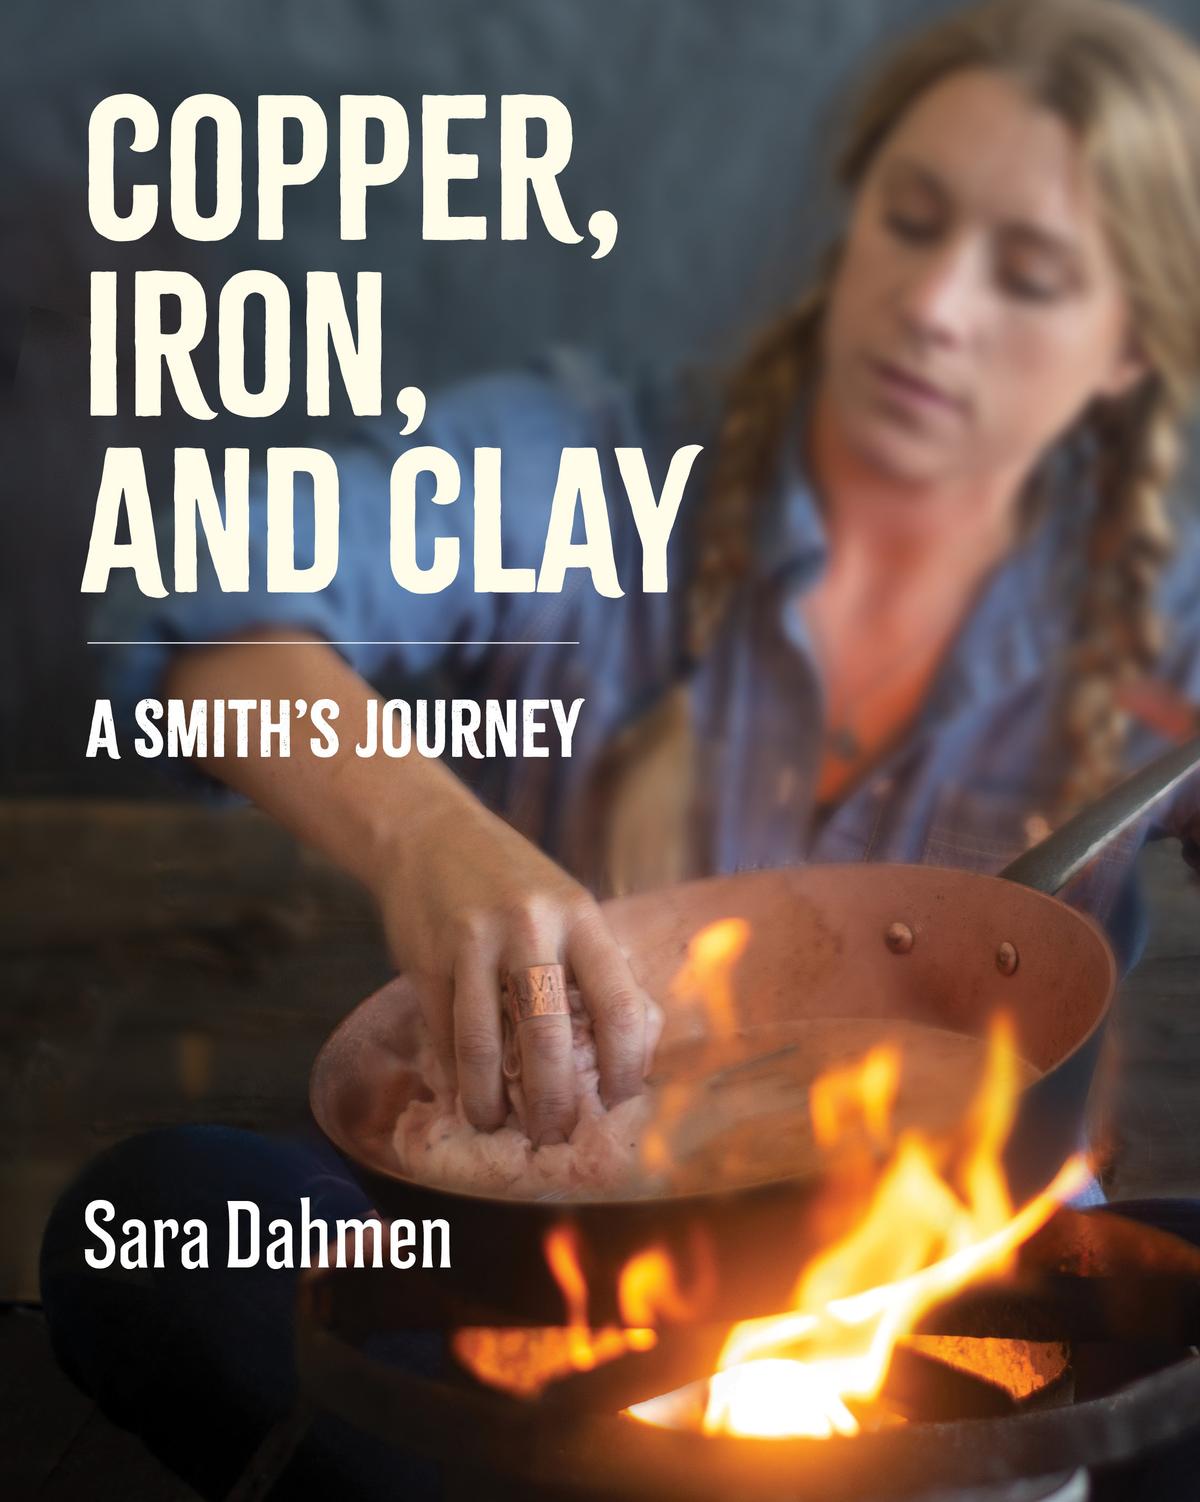 "Copper, Iron, and Clay: A Smith's Journey" by Sara Dahmen (William Morrow/HarperCollins, $32.50).